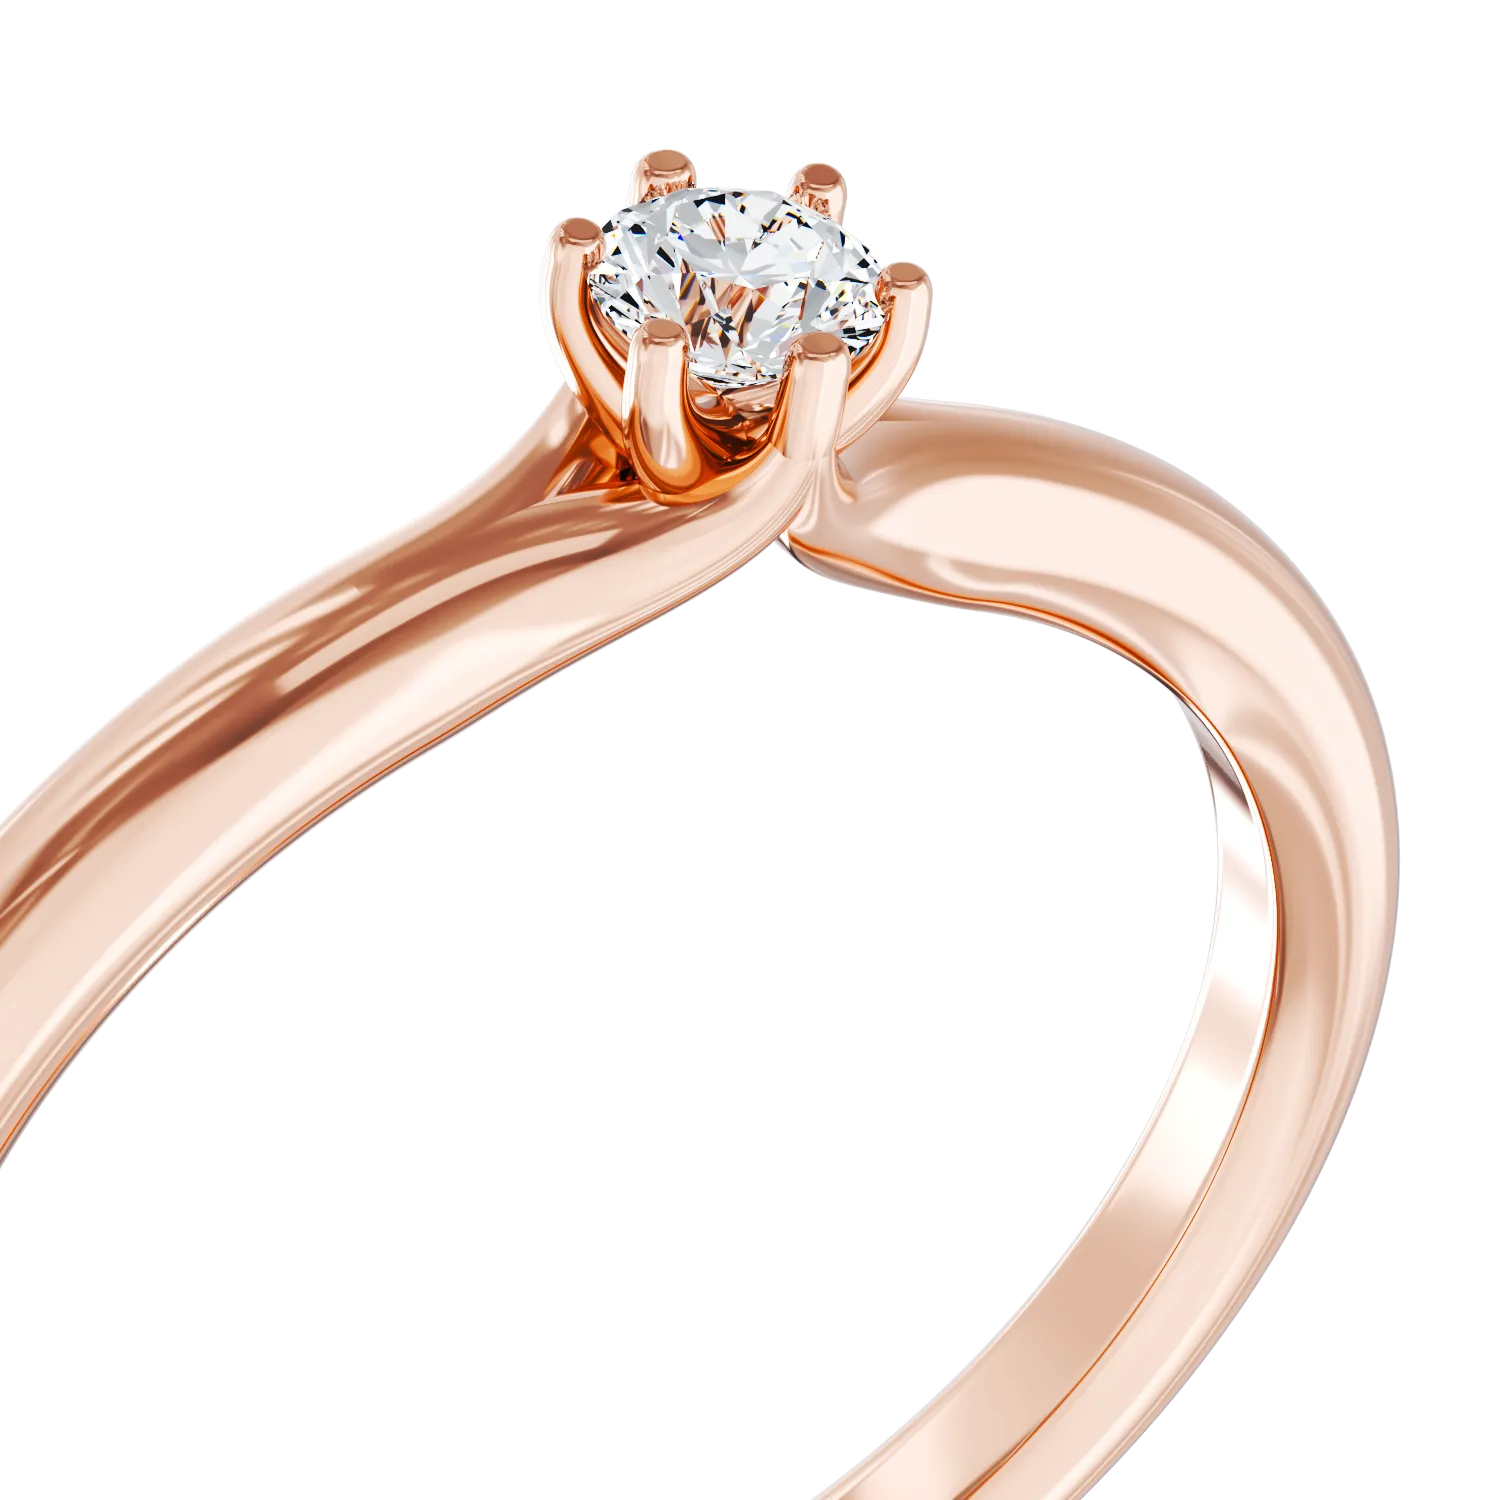 18K rose gold engagement ring with 0.11ct solitaire diamond